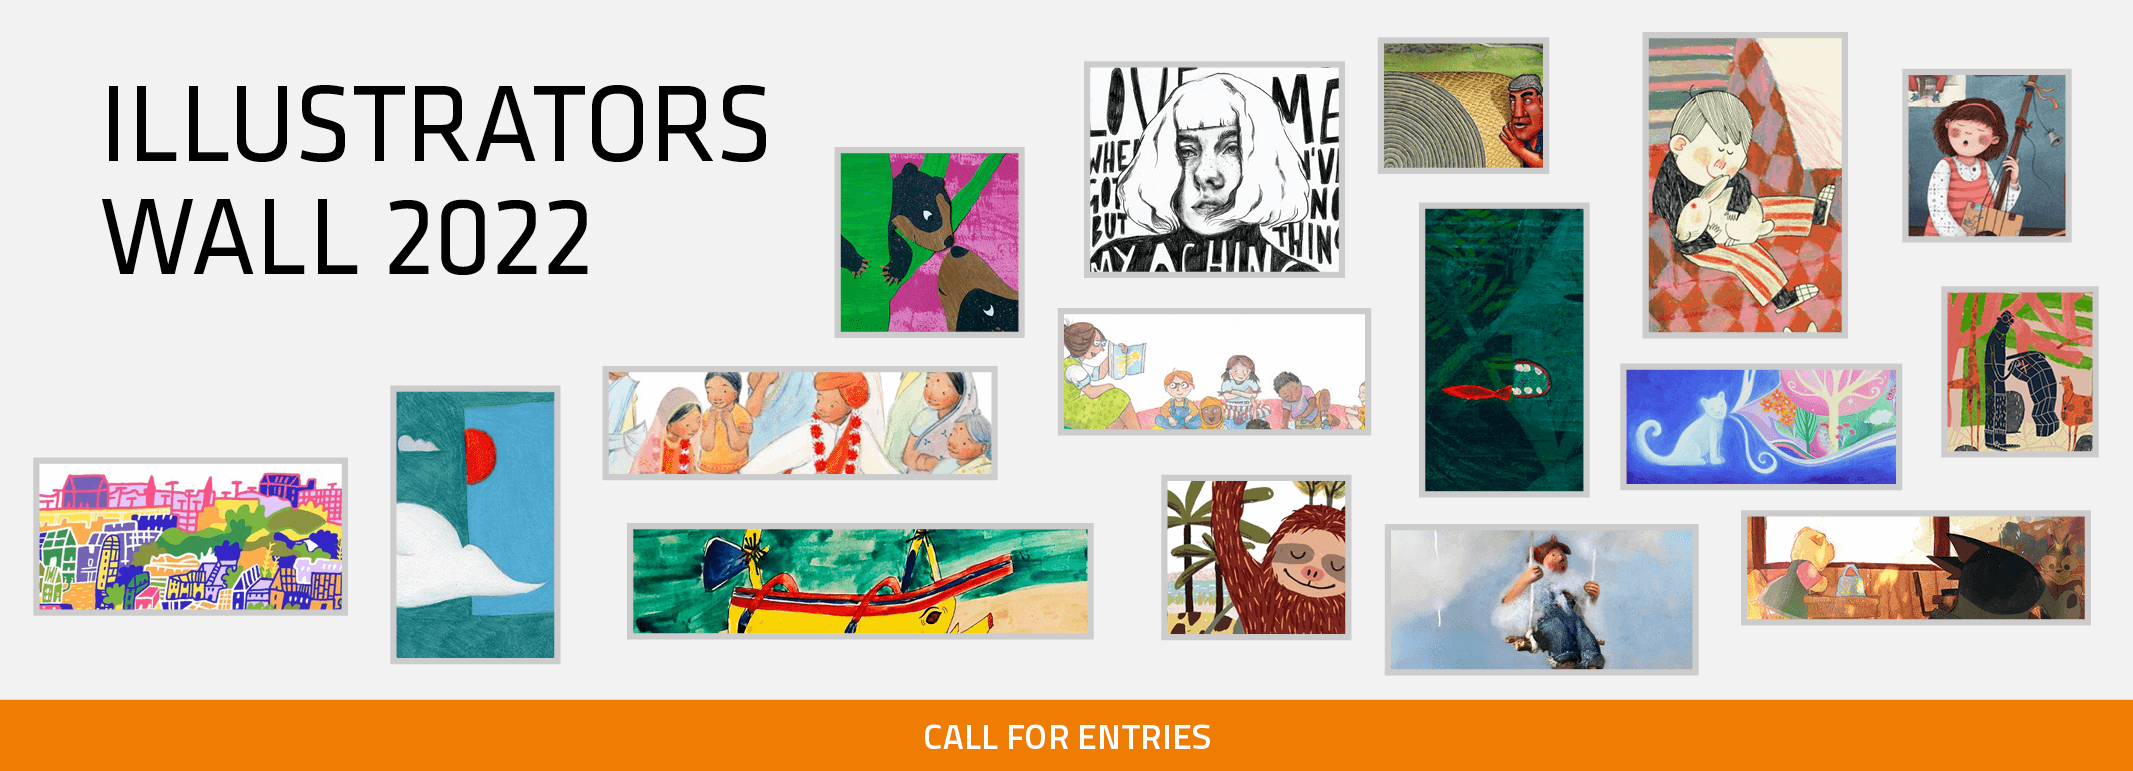 Illustrator Wall - Call for entry